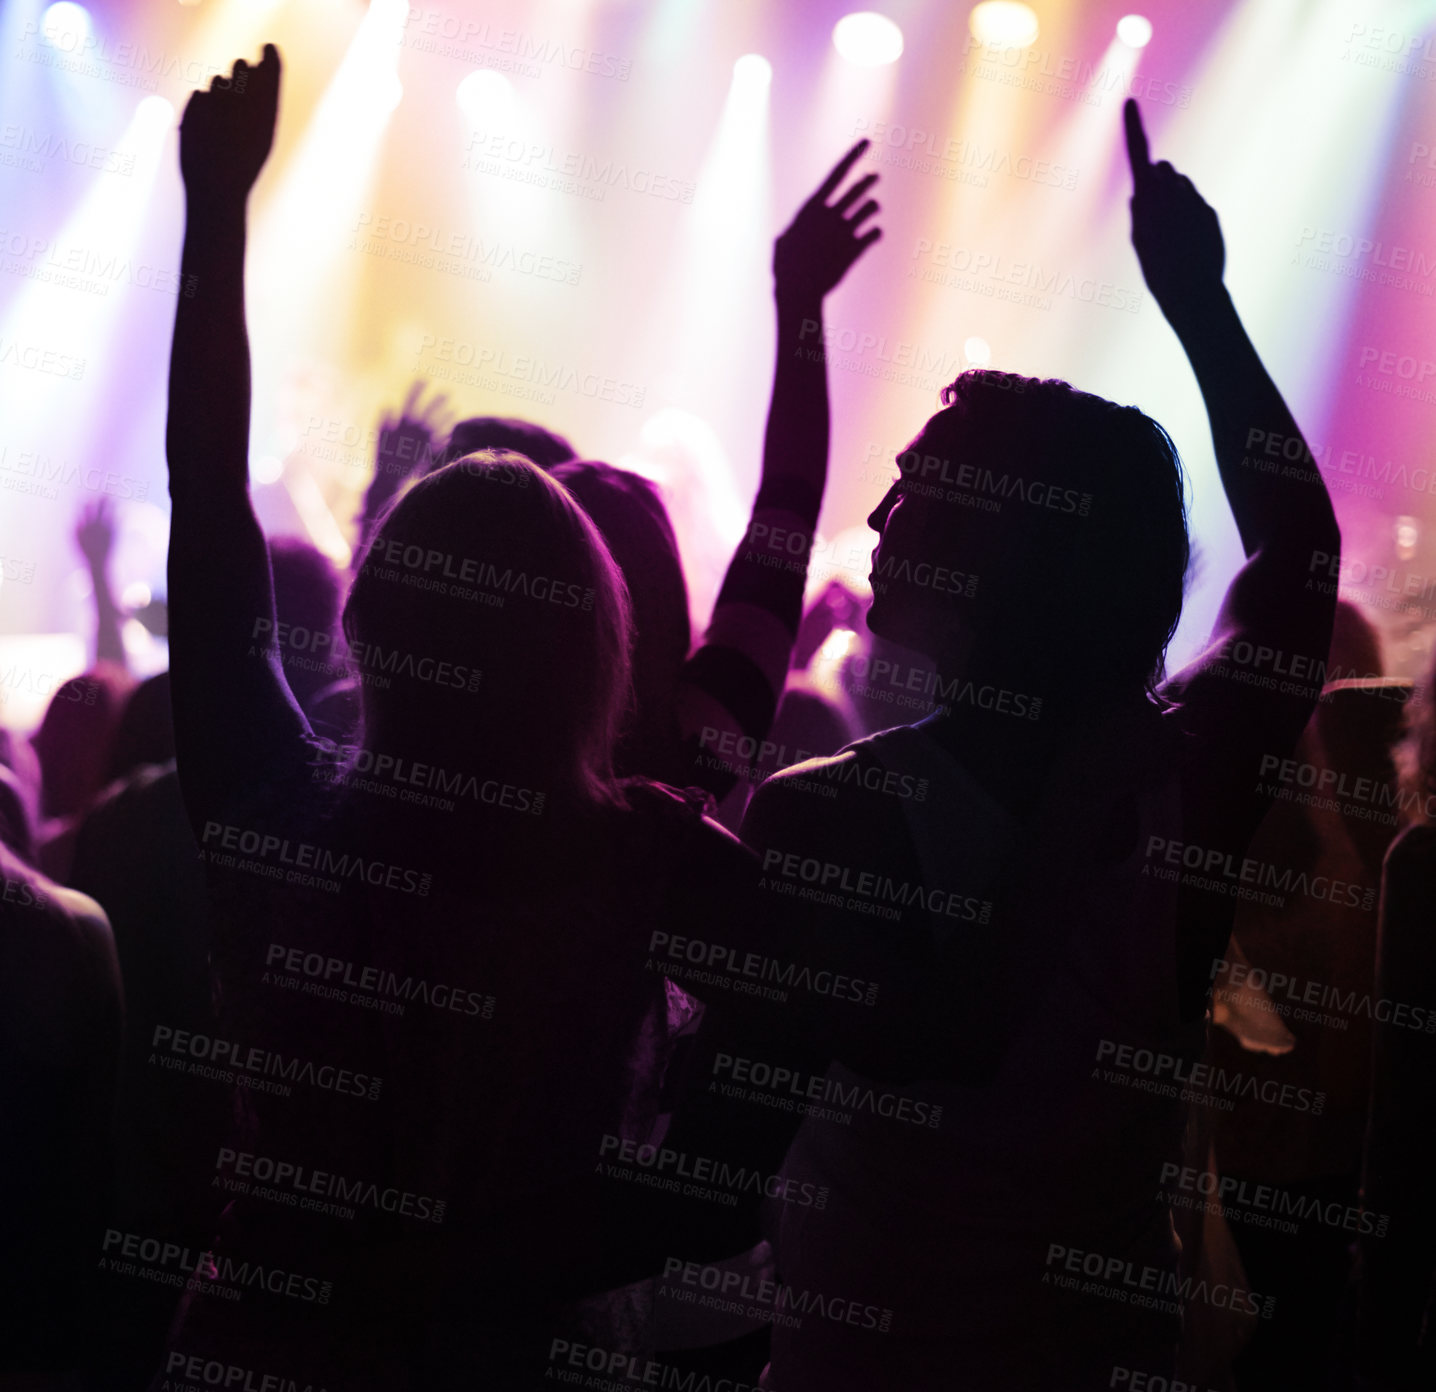 Buy stock photo Fans in silhouette at music festival, hands in air and neon lights with energy at live concert event. Dance, fun and group of excited people in arena at rock band performance or back of crowd at show